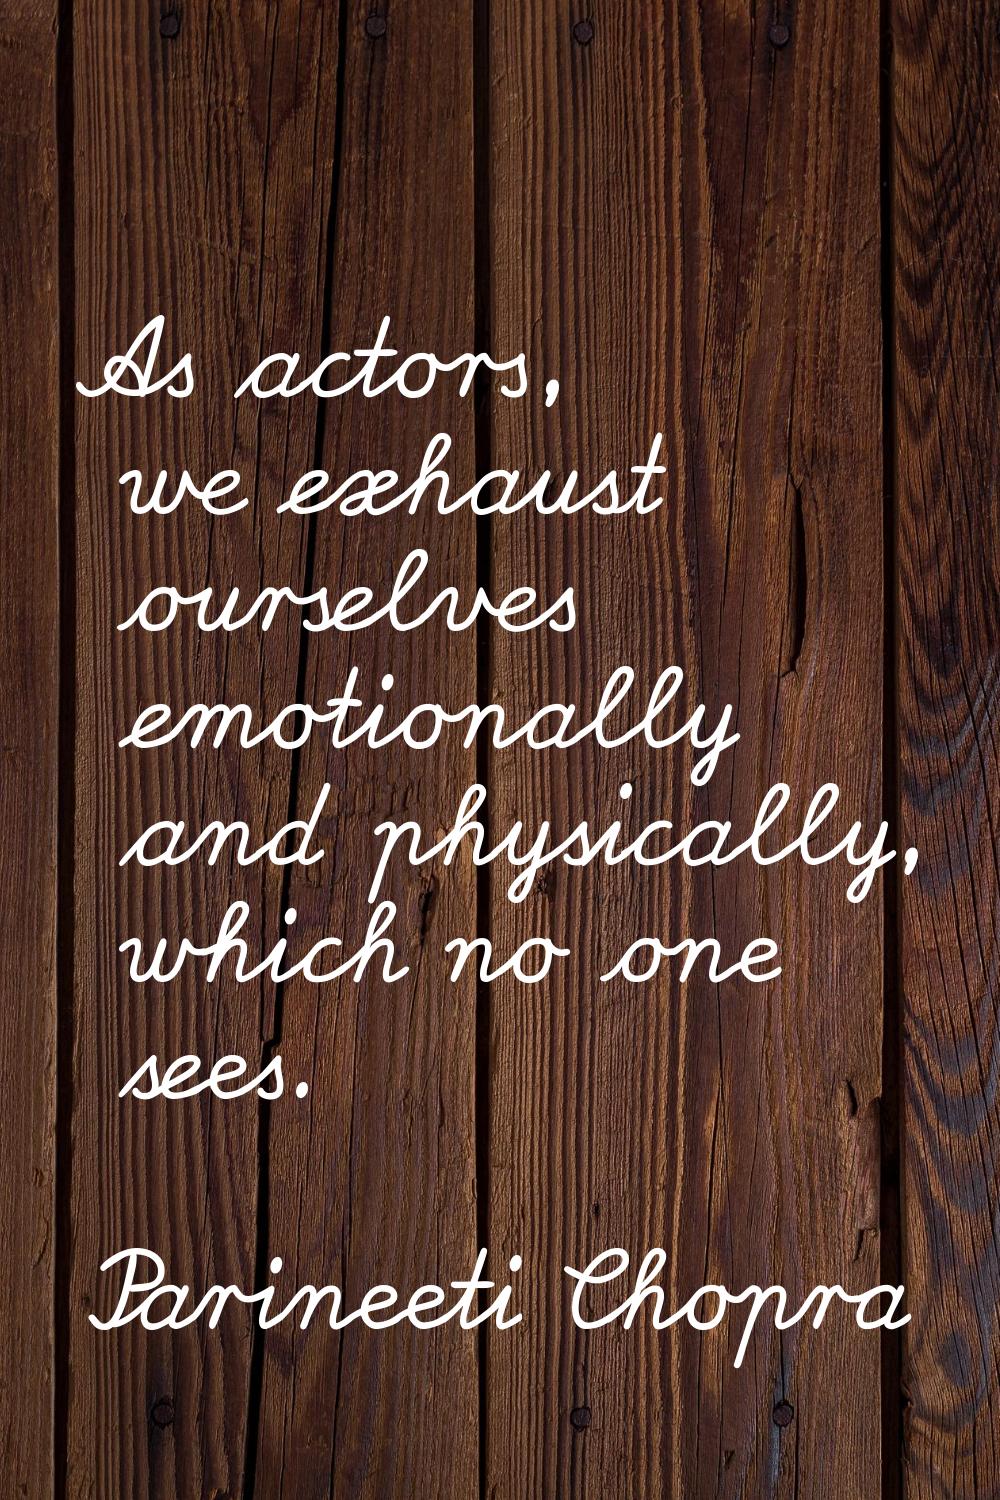 As actors, we exhaust ourselves emotionally and physically, which no one sees.